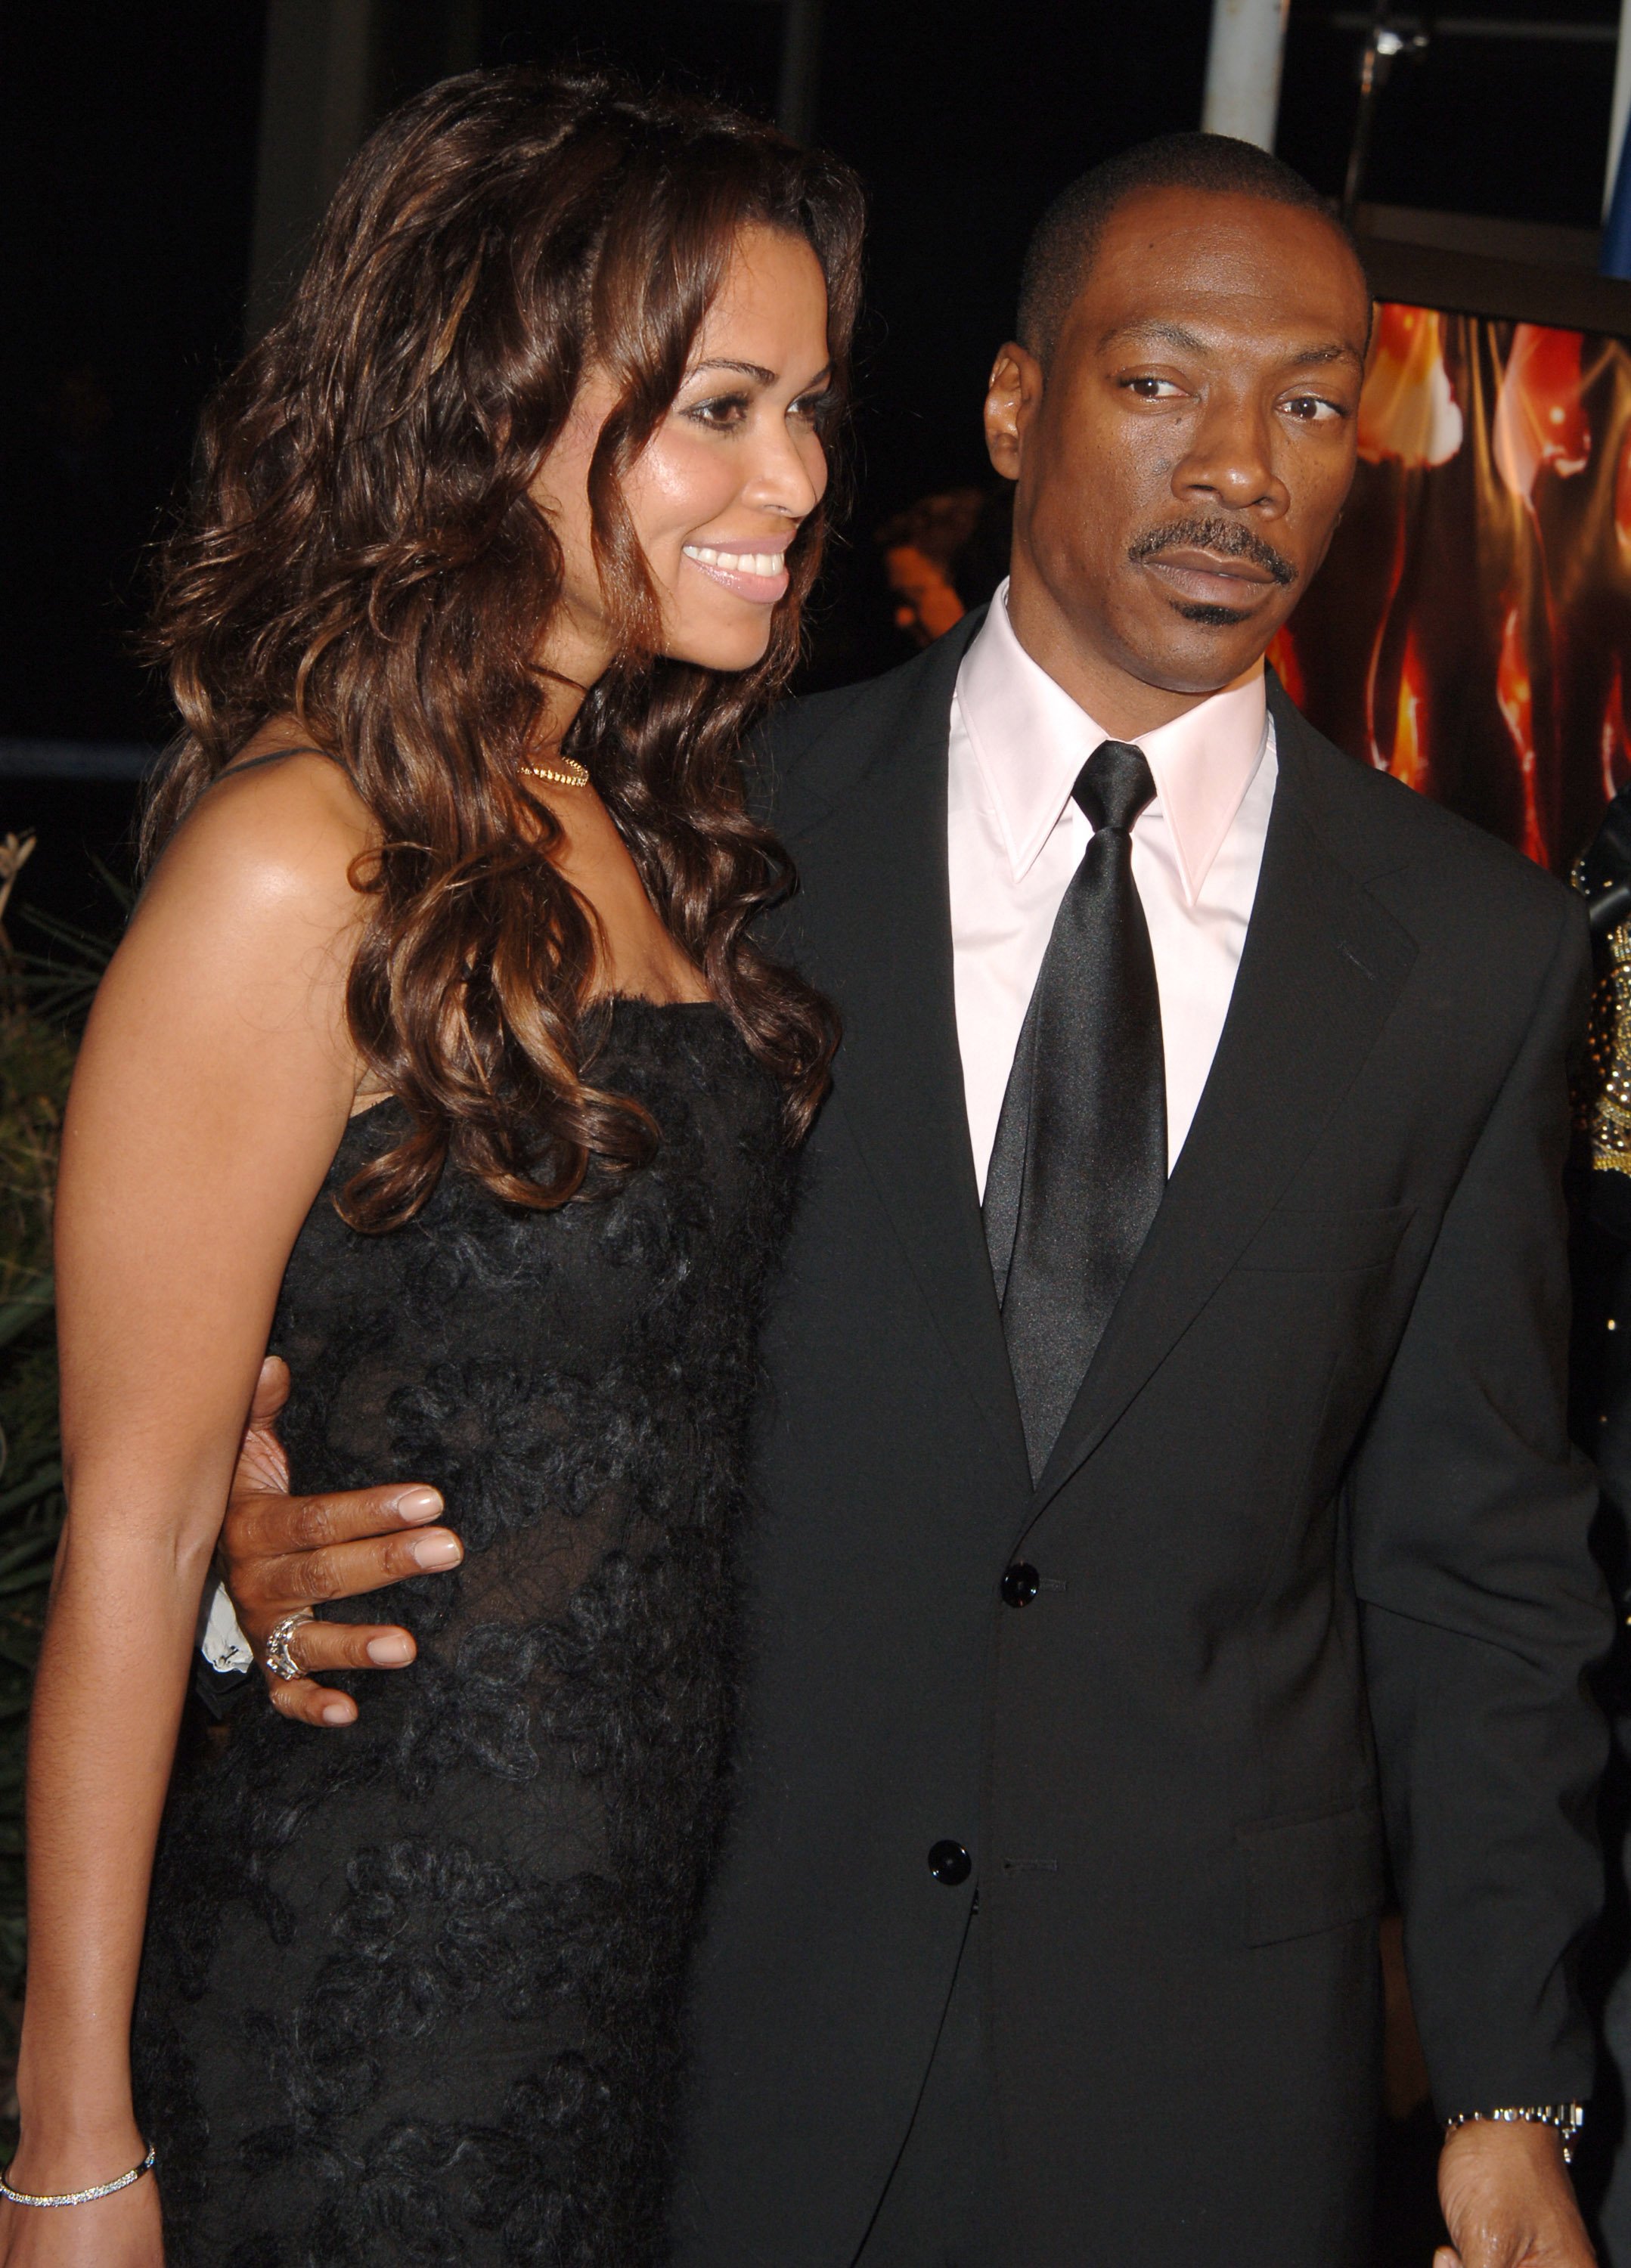 Tracey Edmonds and Eddie Murphy during "Dreamgirls" Los Angeles Premiere - Arrivals at Wilshire Theatre in Beverly Hills, California | Source: Getty Images